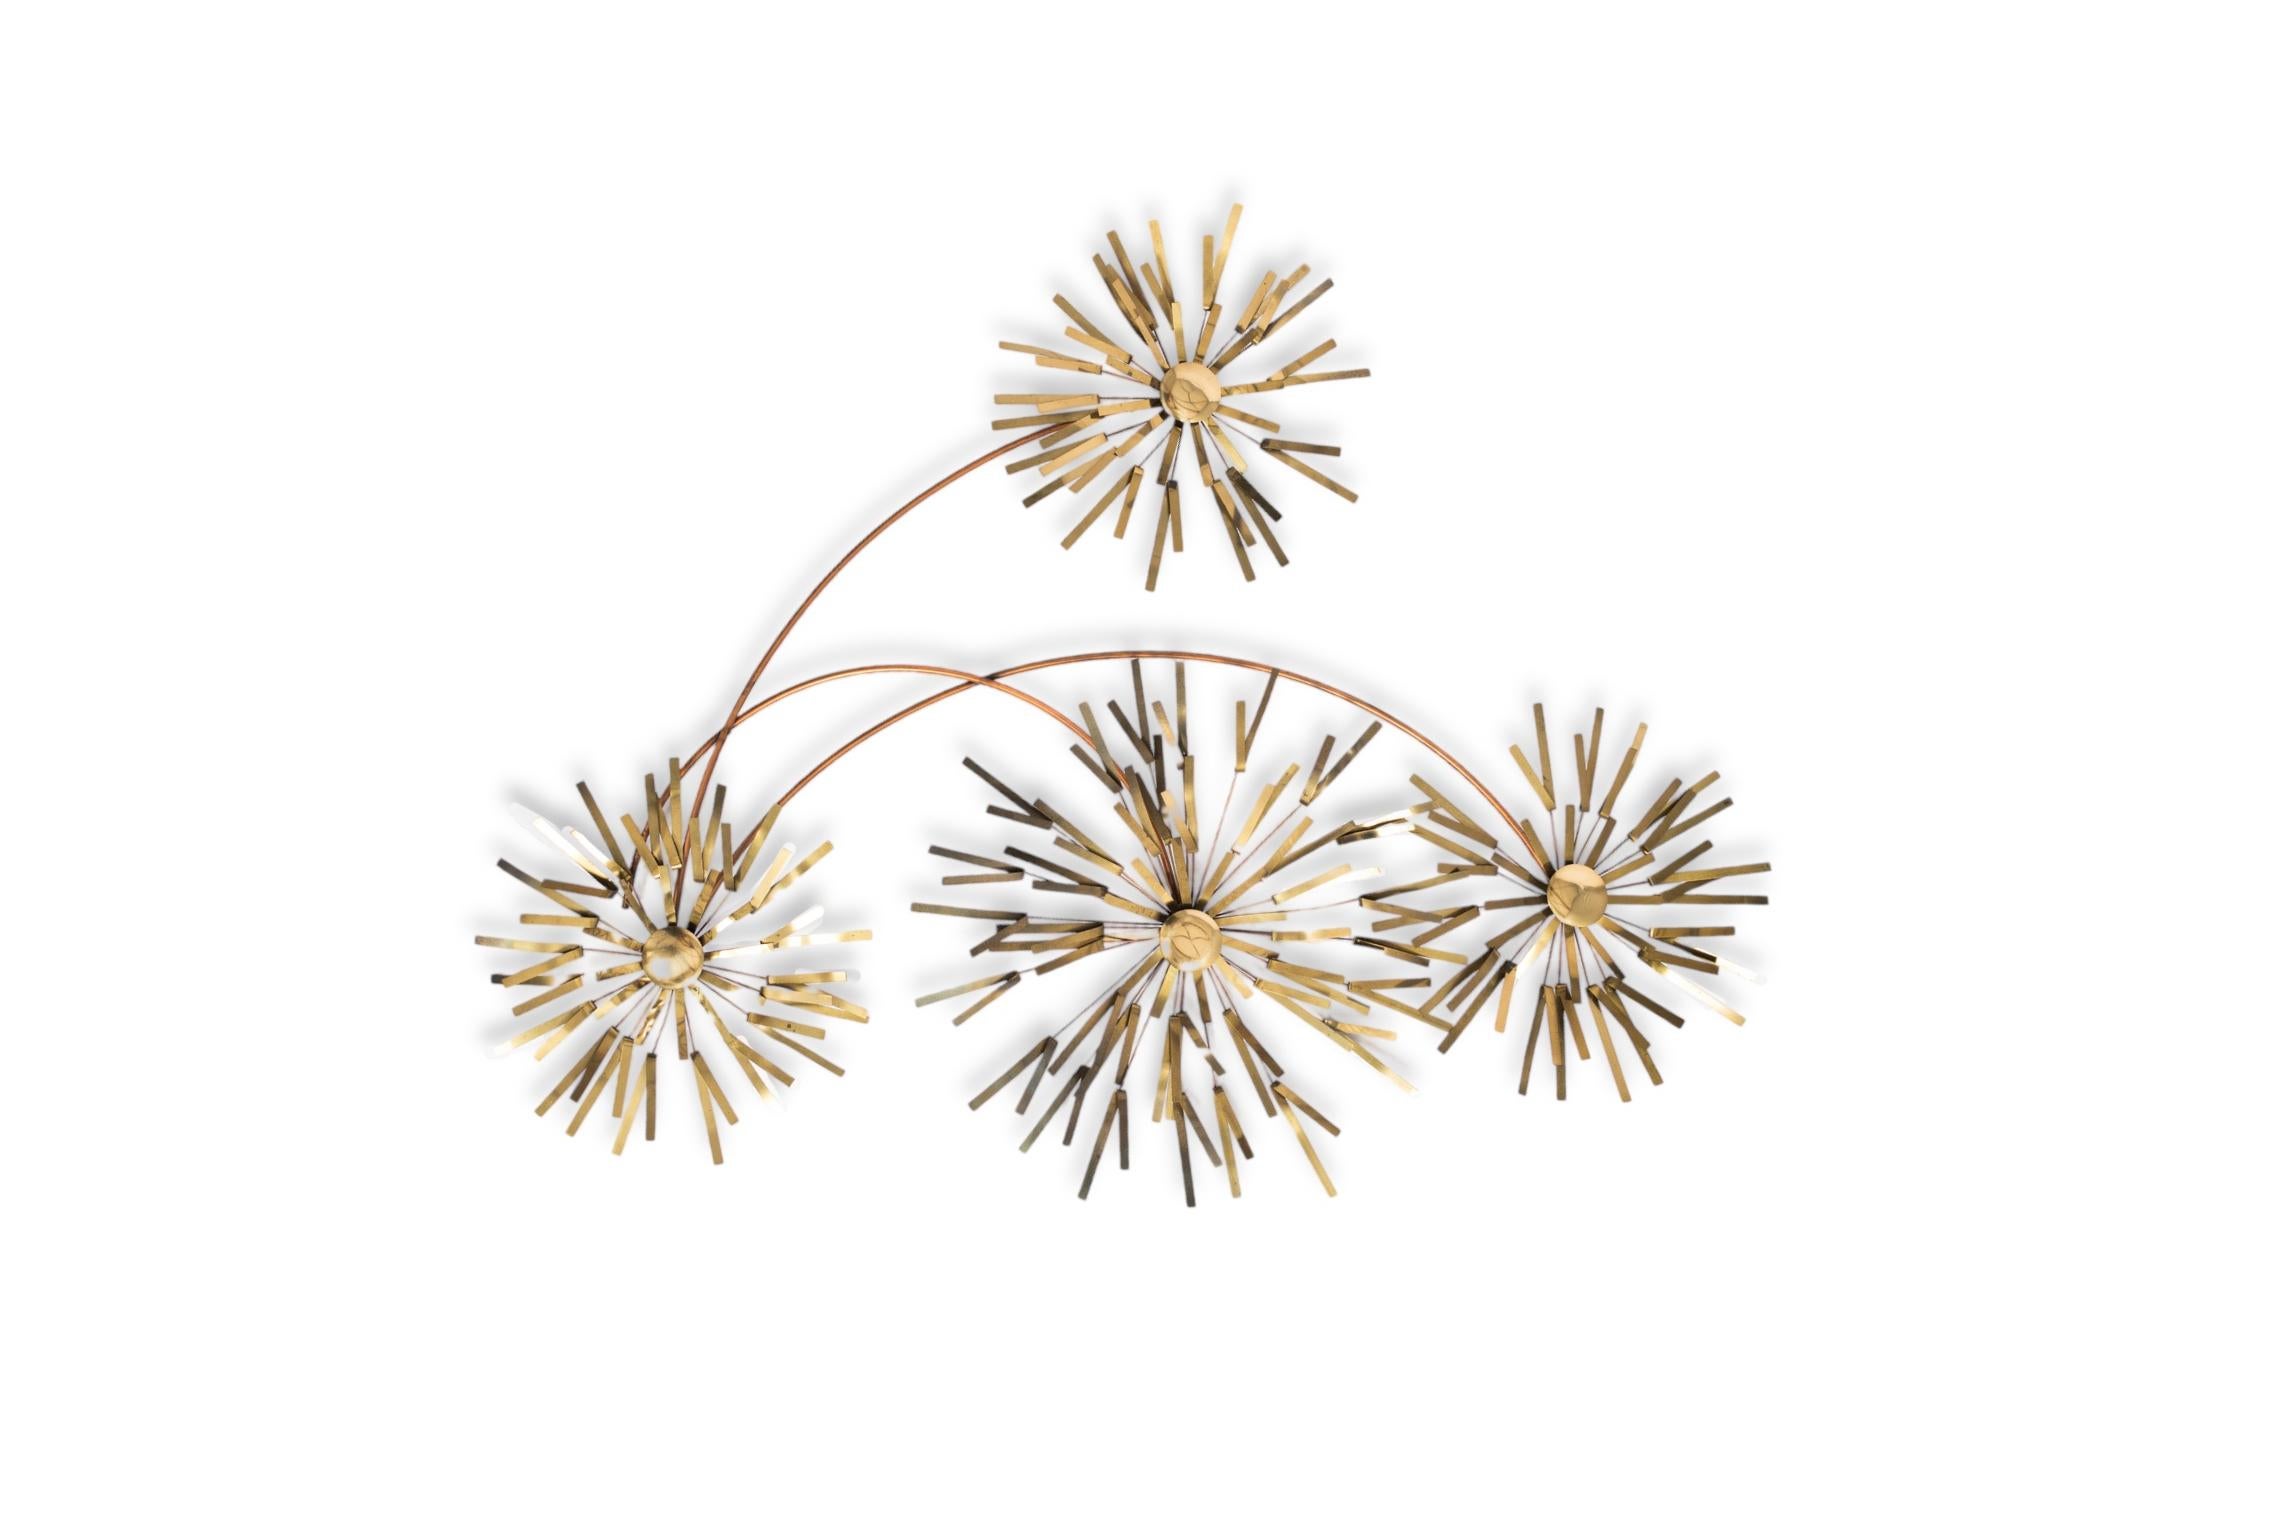 This vintage mid century modern Curtis Jere fireworks pom pom metal wall hanging features beautiful stylized round pom poms sculpted from soldered and bent brass on copper metal rods. Wall mount metal hooks are looped into the design on back. Can be